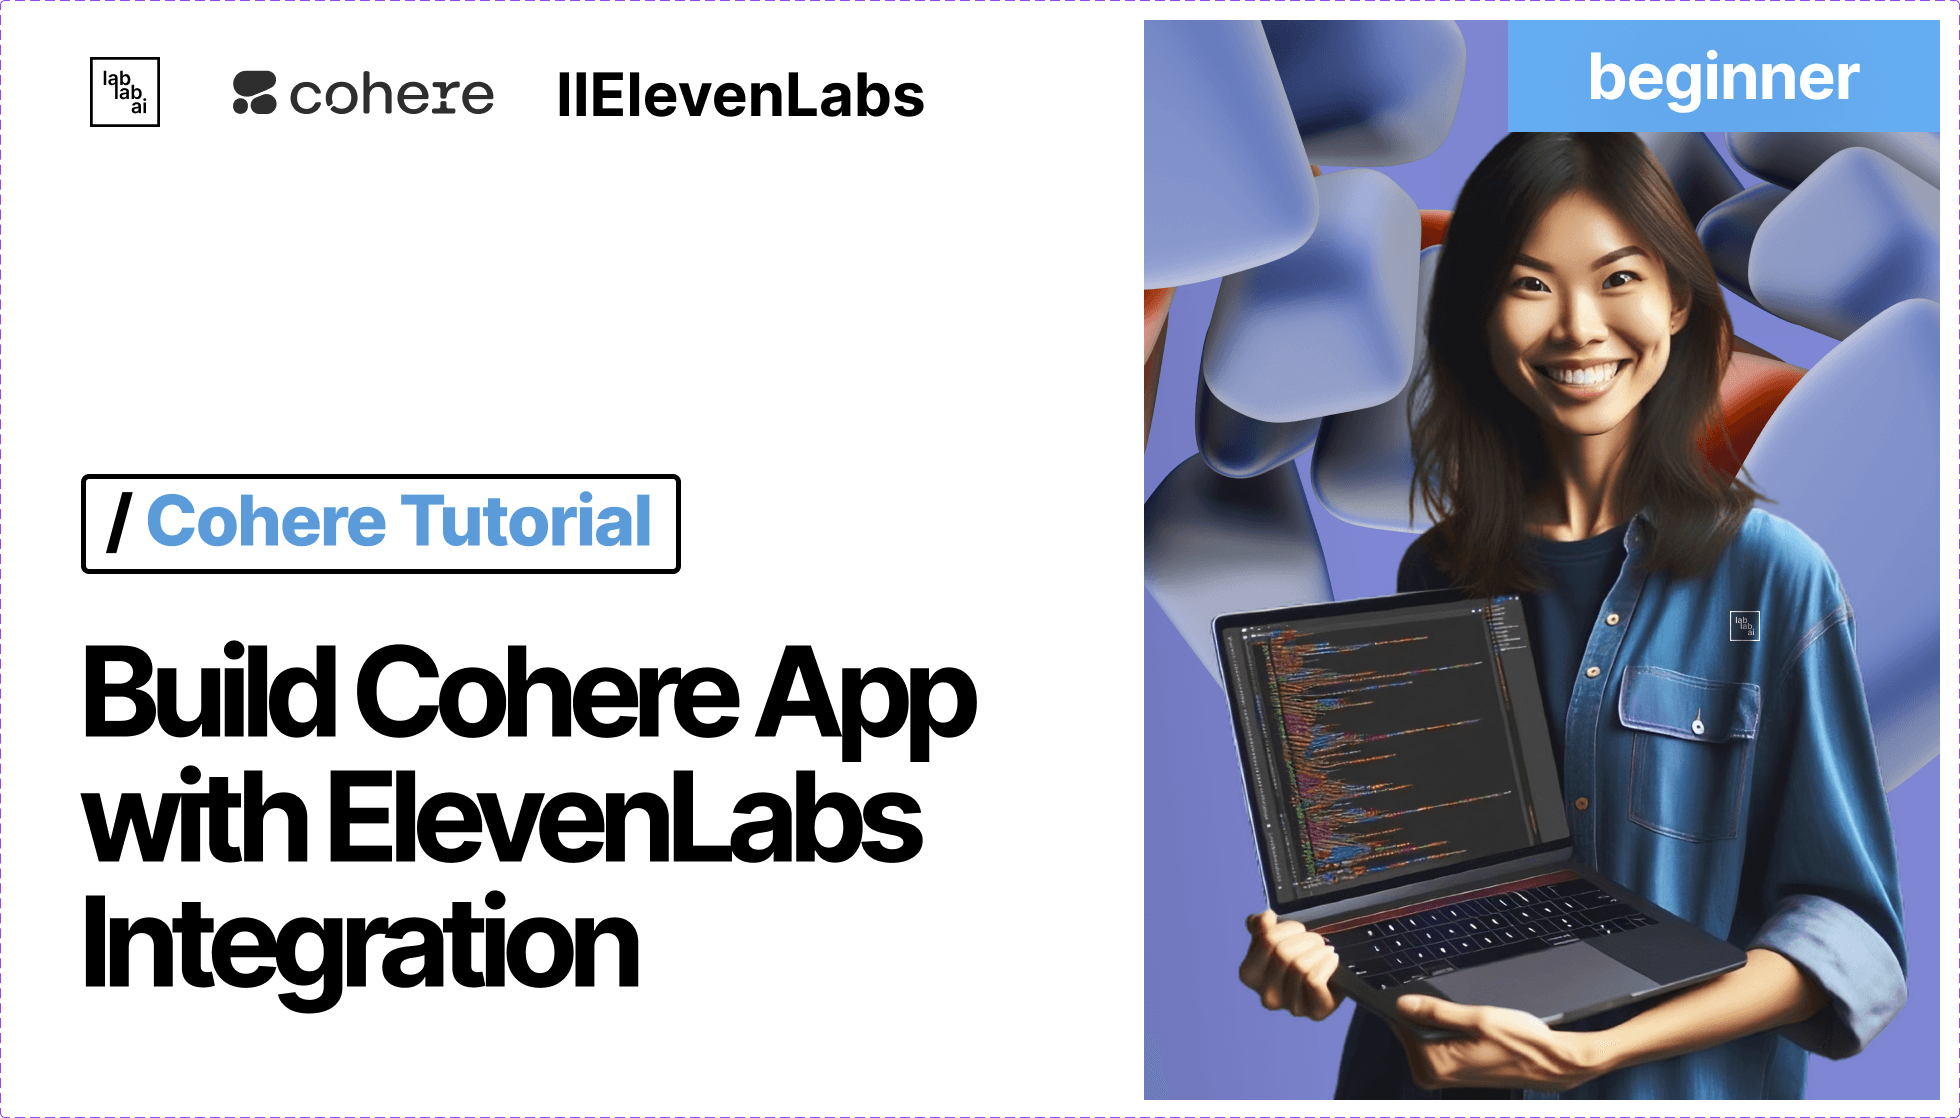 Cohere's Rerank Model: Build Cohere App with ElevenLabs Integration